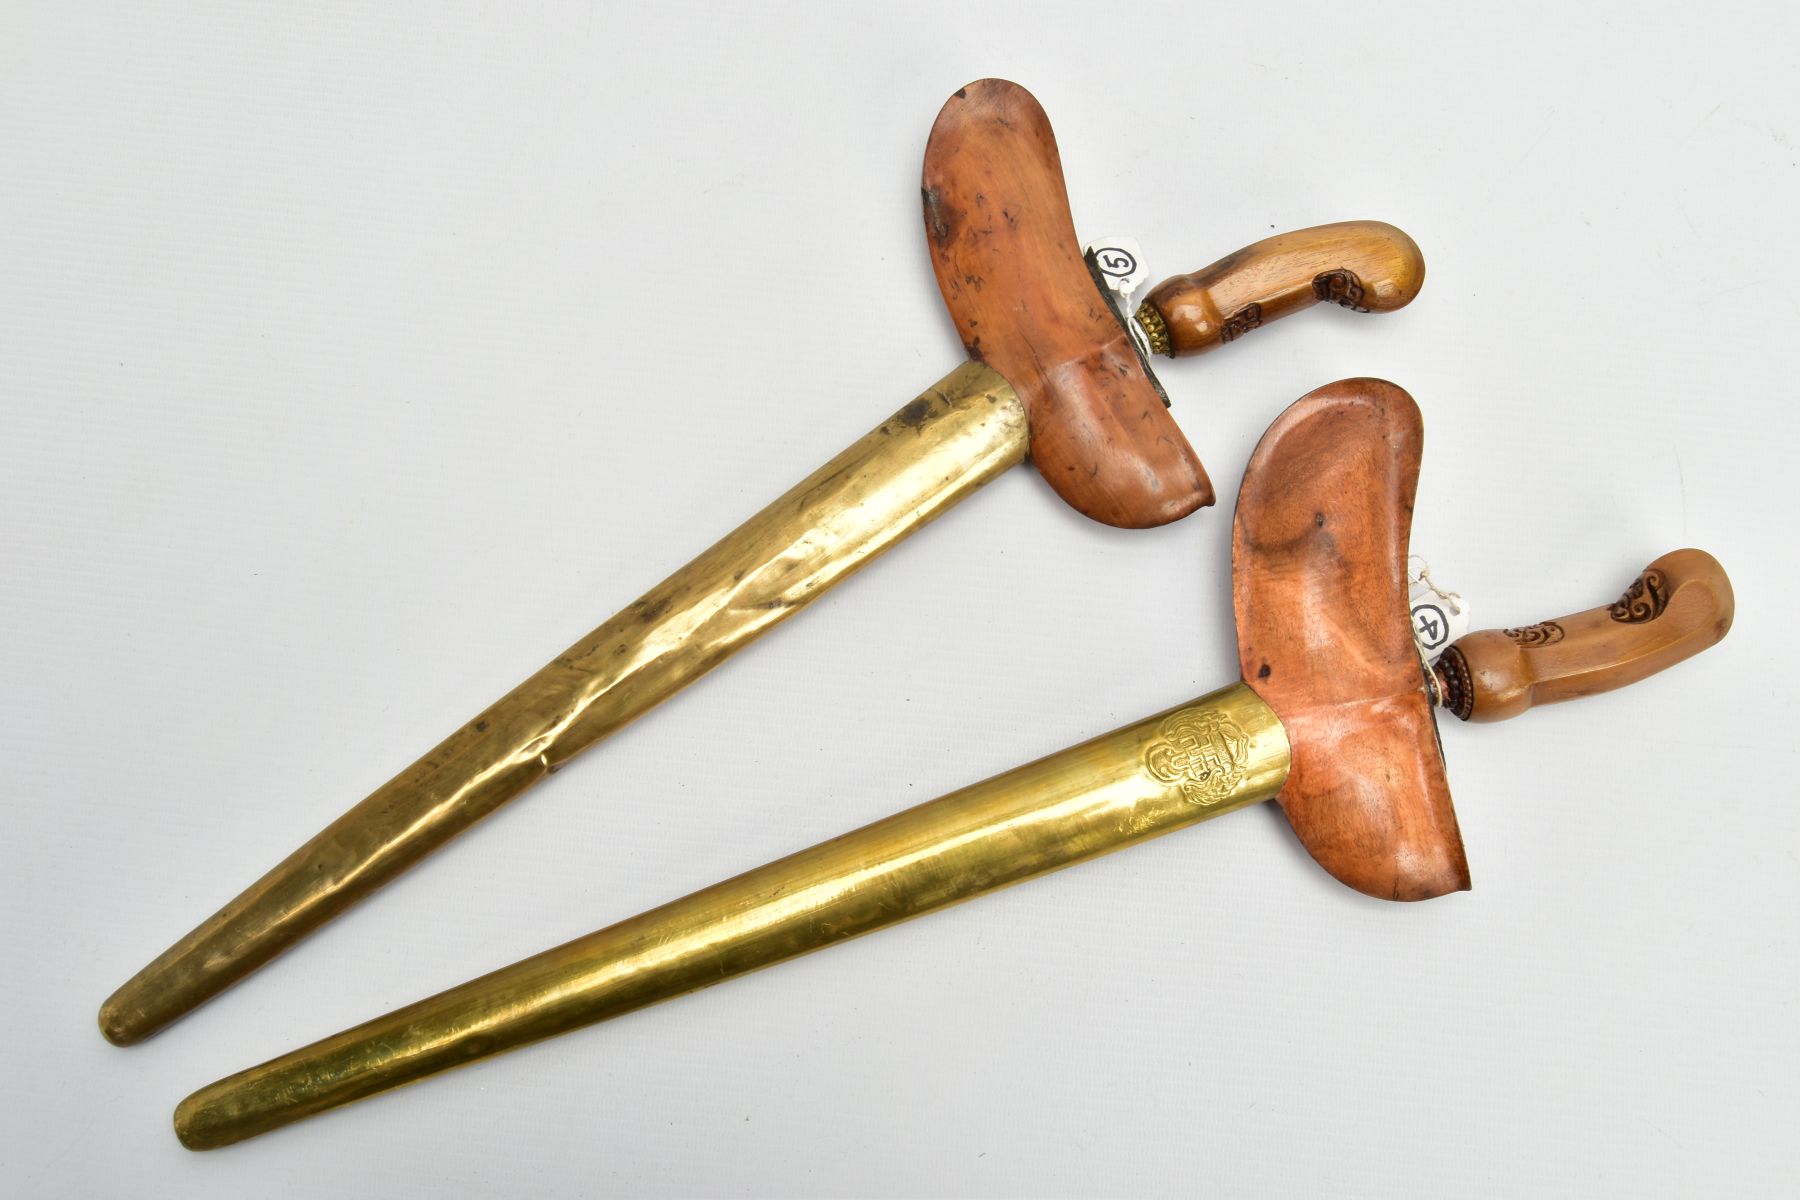 TWO MALAY/INDONESIAN KRIS DAGGERS, possibly a pair, ornate metal sheaths(warangka) carved wooden - Image 2 of 9